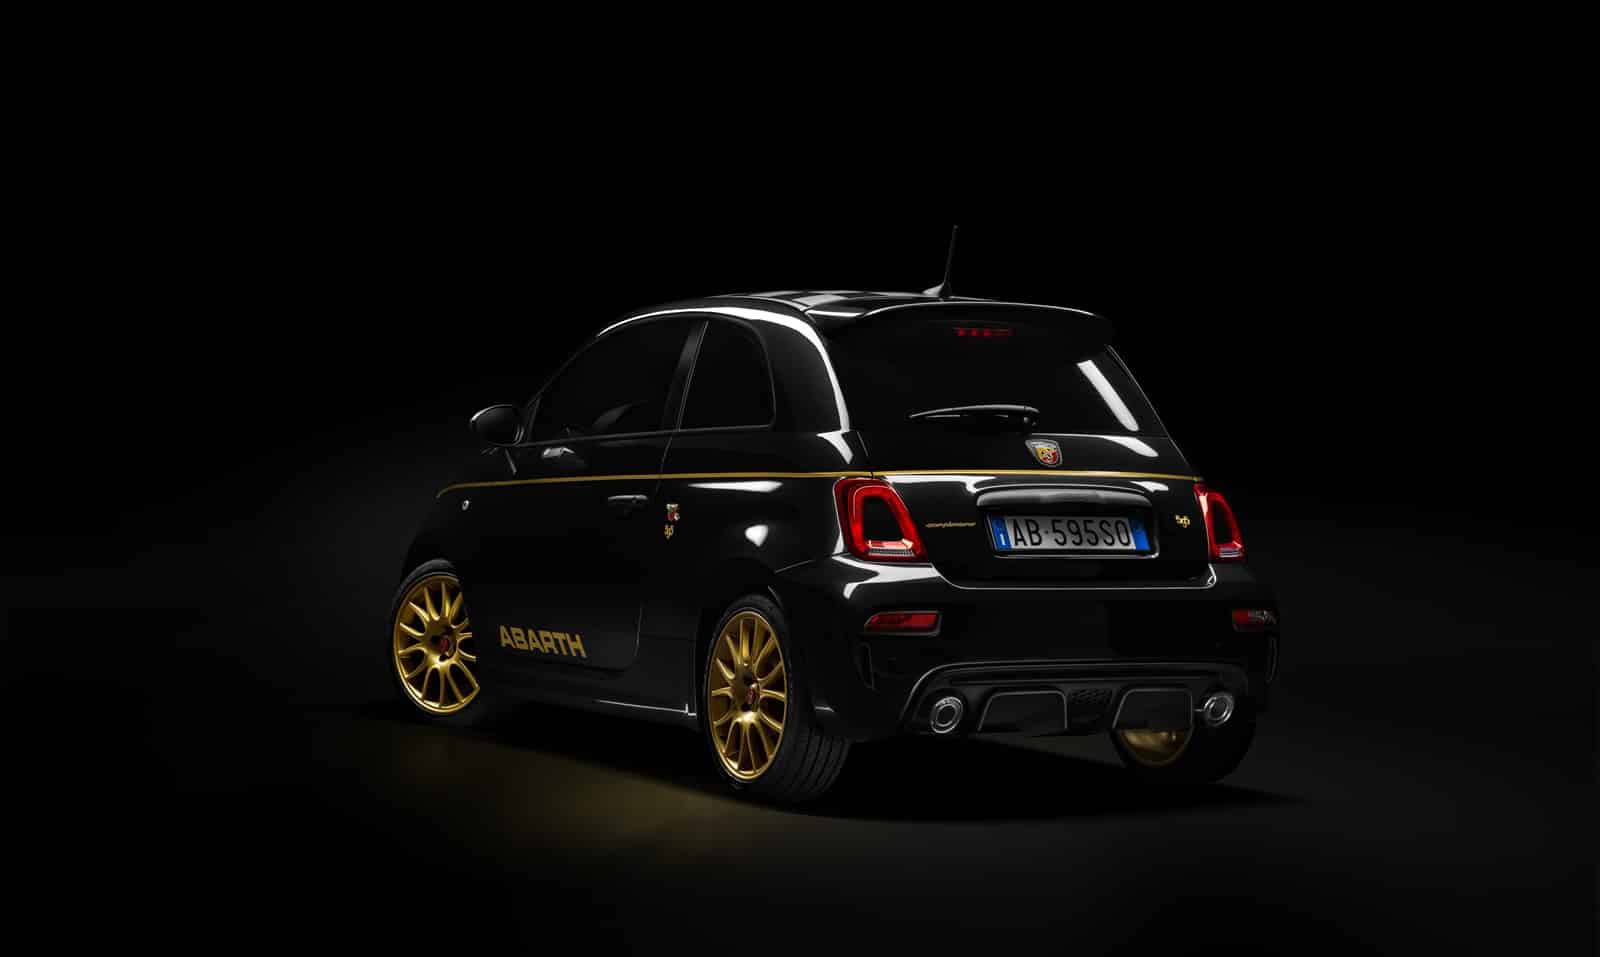 A succulent tribute to the A112 Abarth "Gold Ring